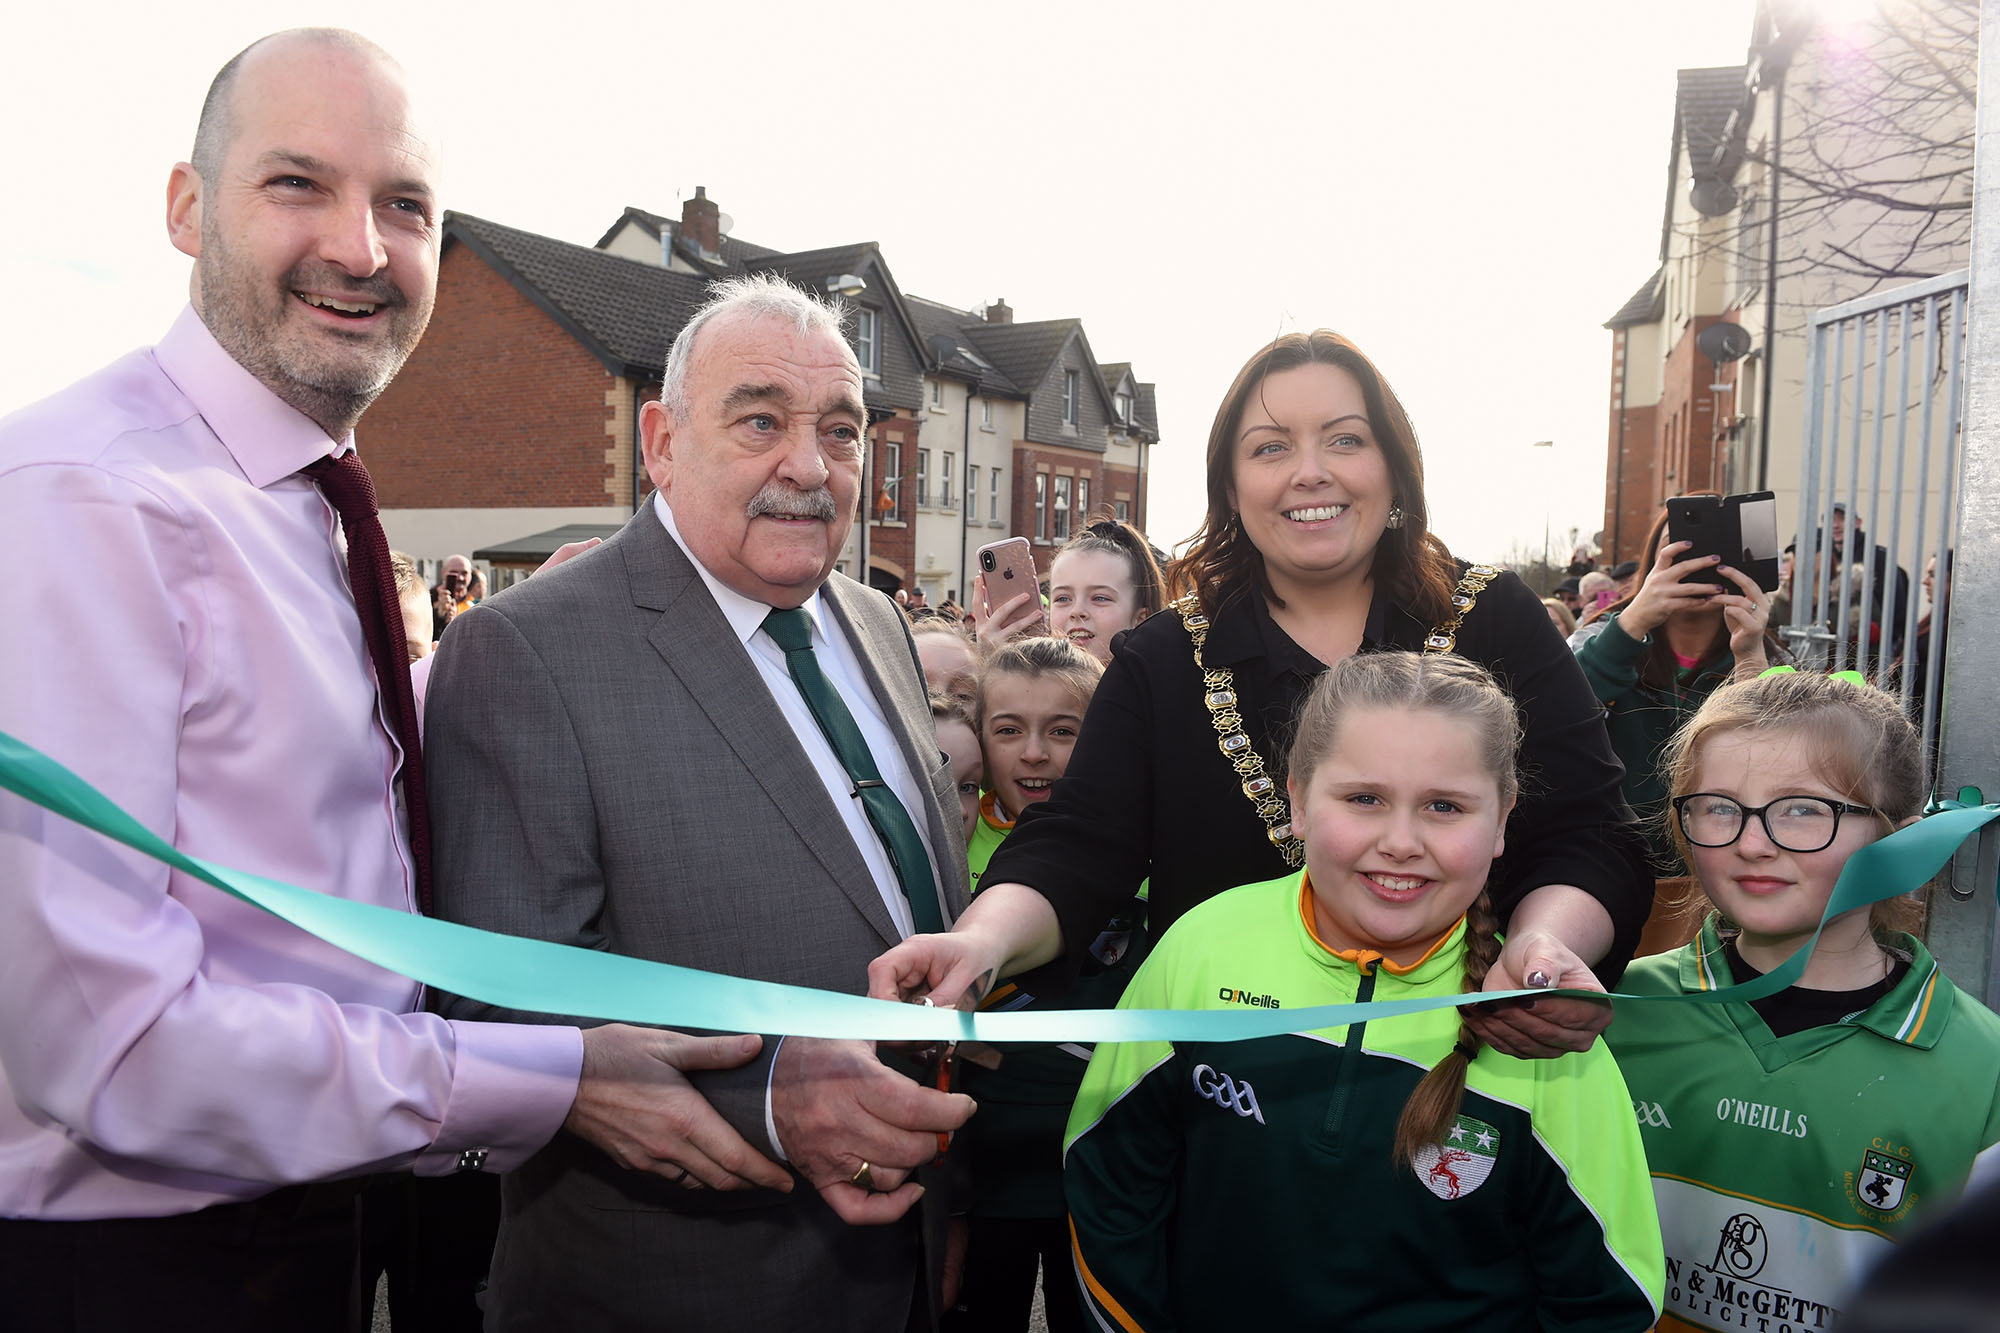 Lord Mayor Deirdre Hargey with Andrew McCracken (Chief Executive of Community Fund for Northern Ireland), Davitts’s Chairman, Tommy Shaw and club supporters Naoibh Heaney and Sophie Skelly at the official opening of new community sports and recreation facilities at Davitt Park